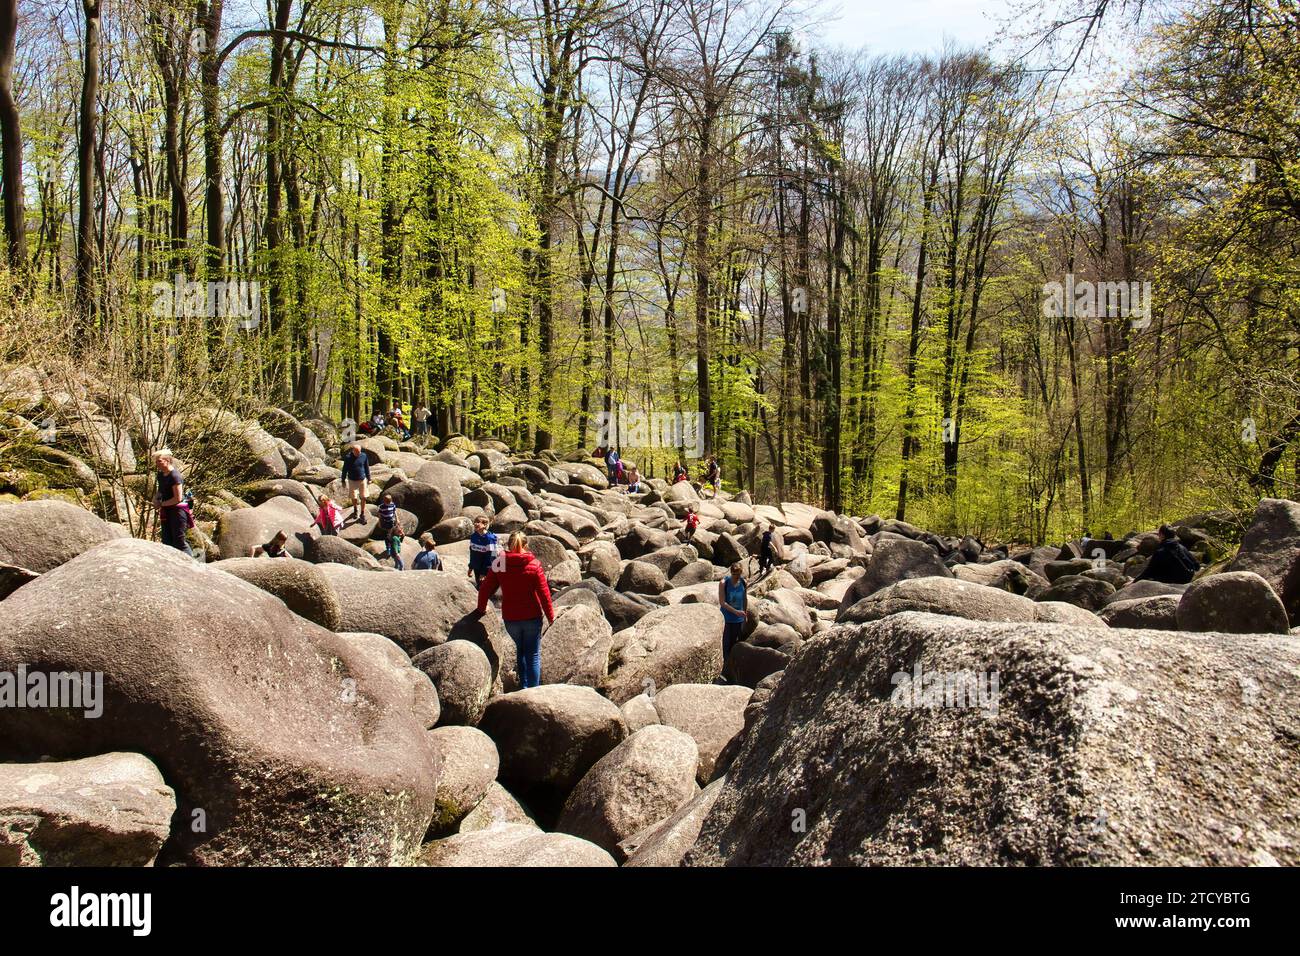 Lautertal, Germany - April 24, 2021: People climbing up and down rocks on a hill surrounded by green trees on a spring day at Felsenmeer in Germany. Stock Photo